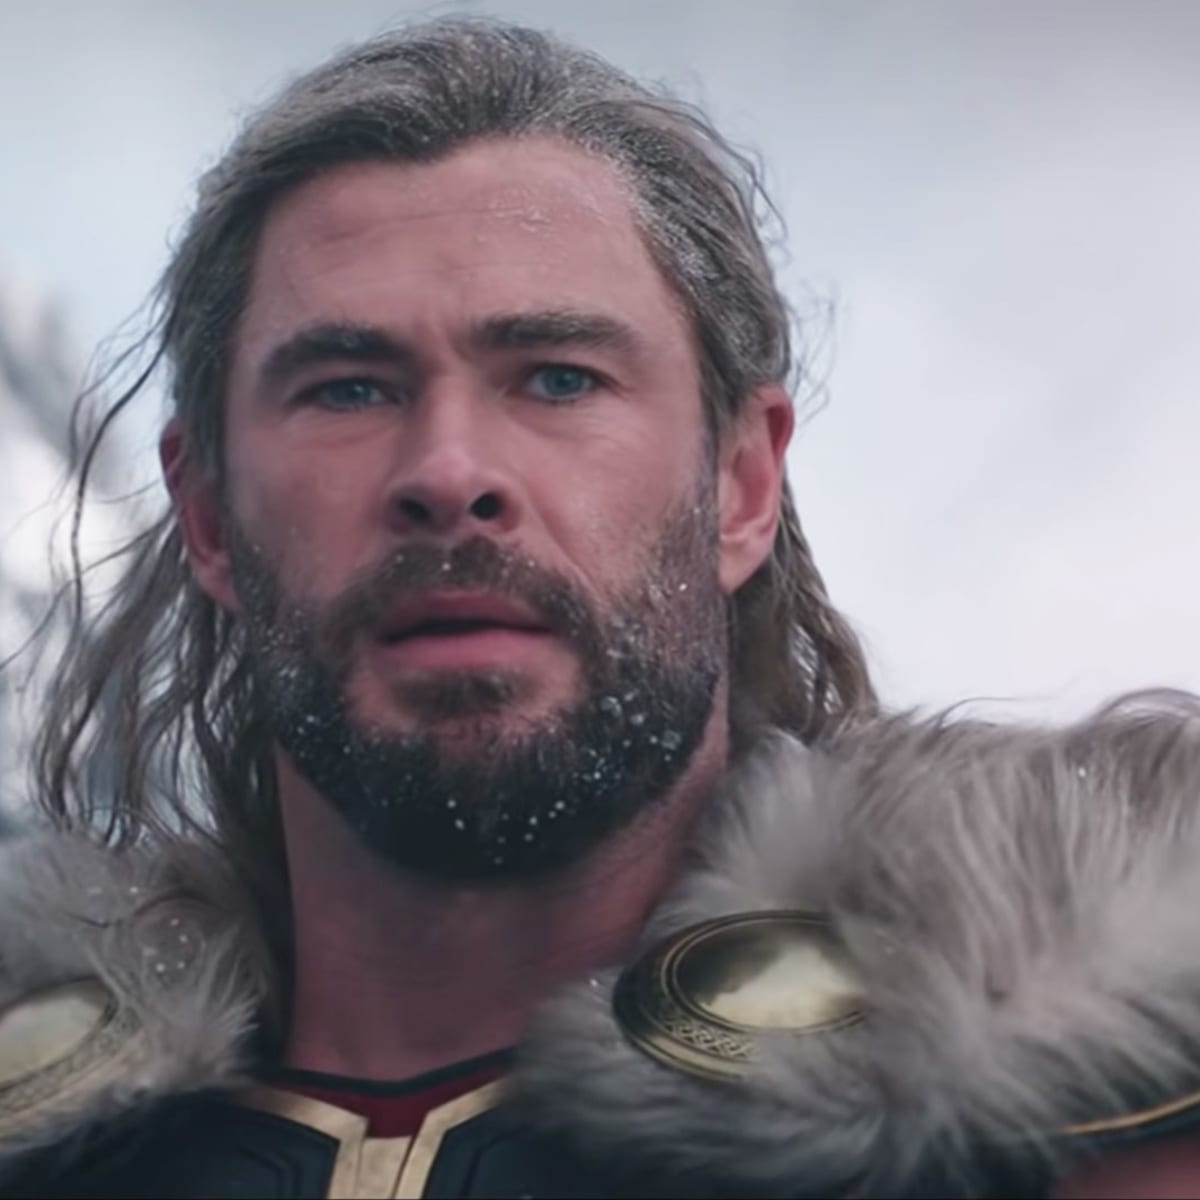 What Is Twitter Saying About Disney's 'Thor: Love and Thunder'? - TheStreet